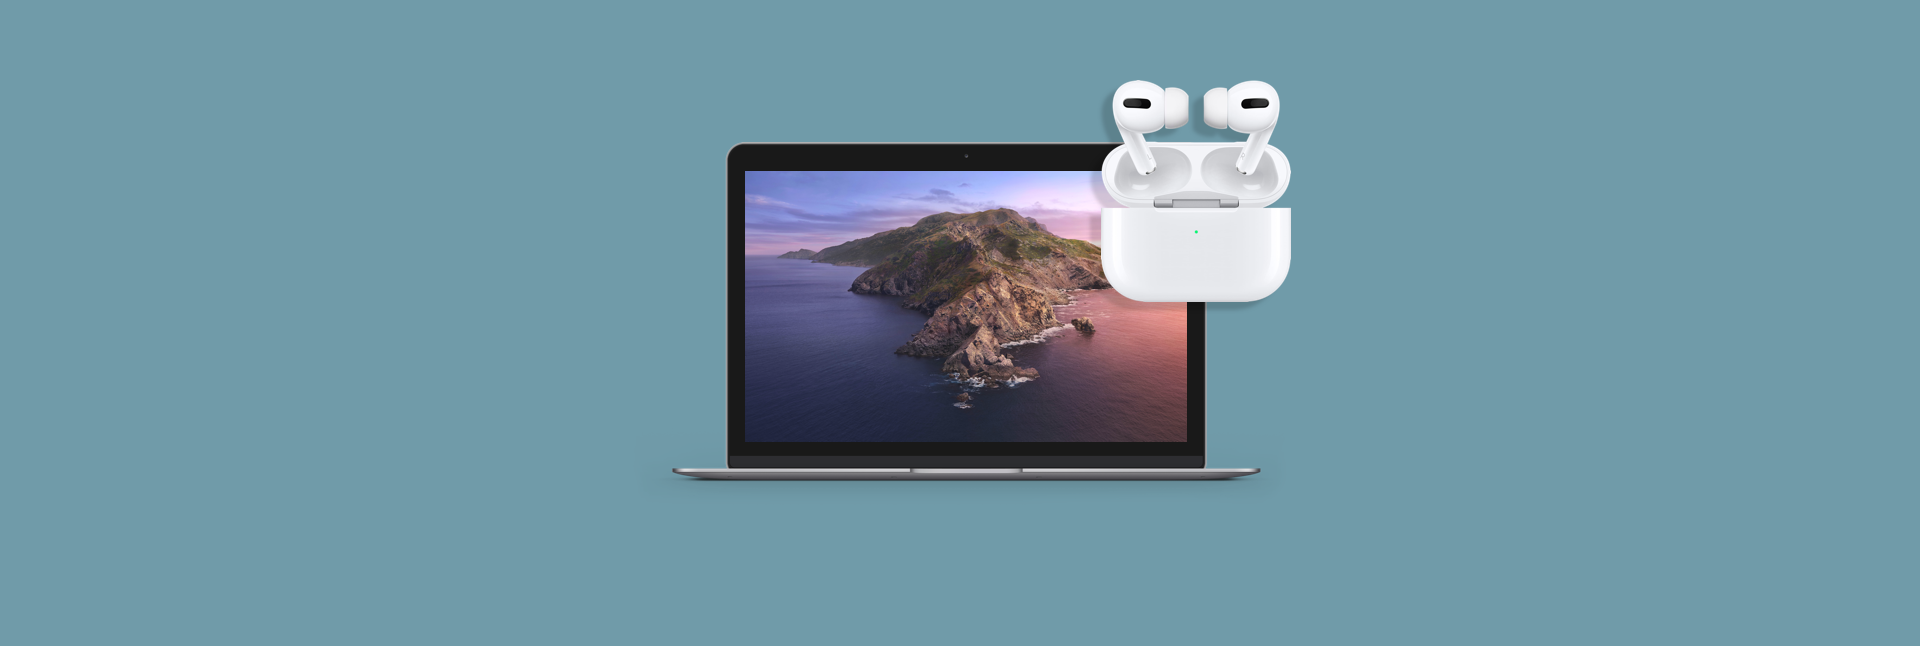 How To Connect Airpods To Your Macbook Digital Trends